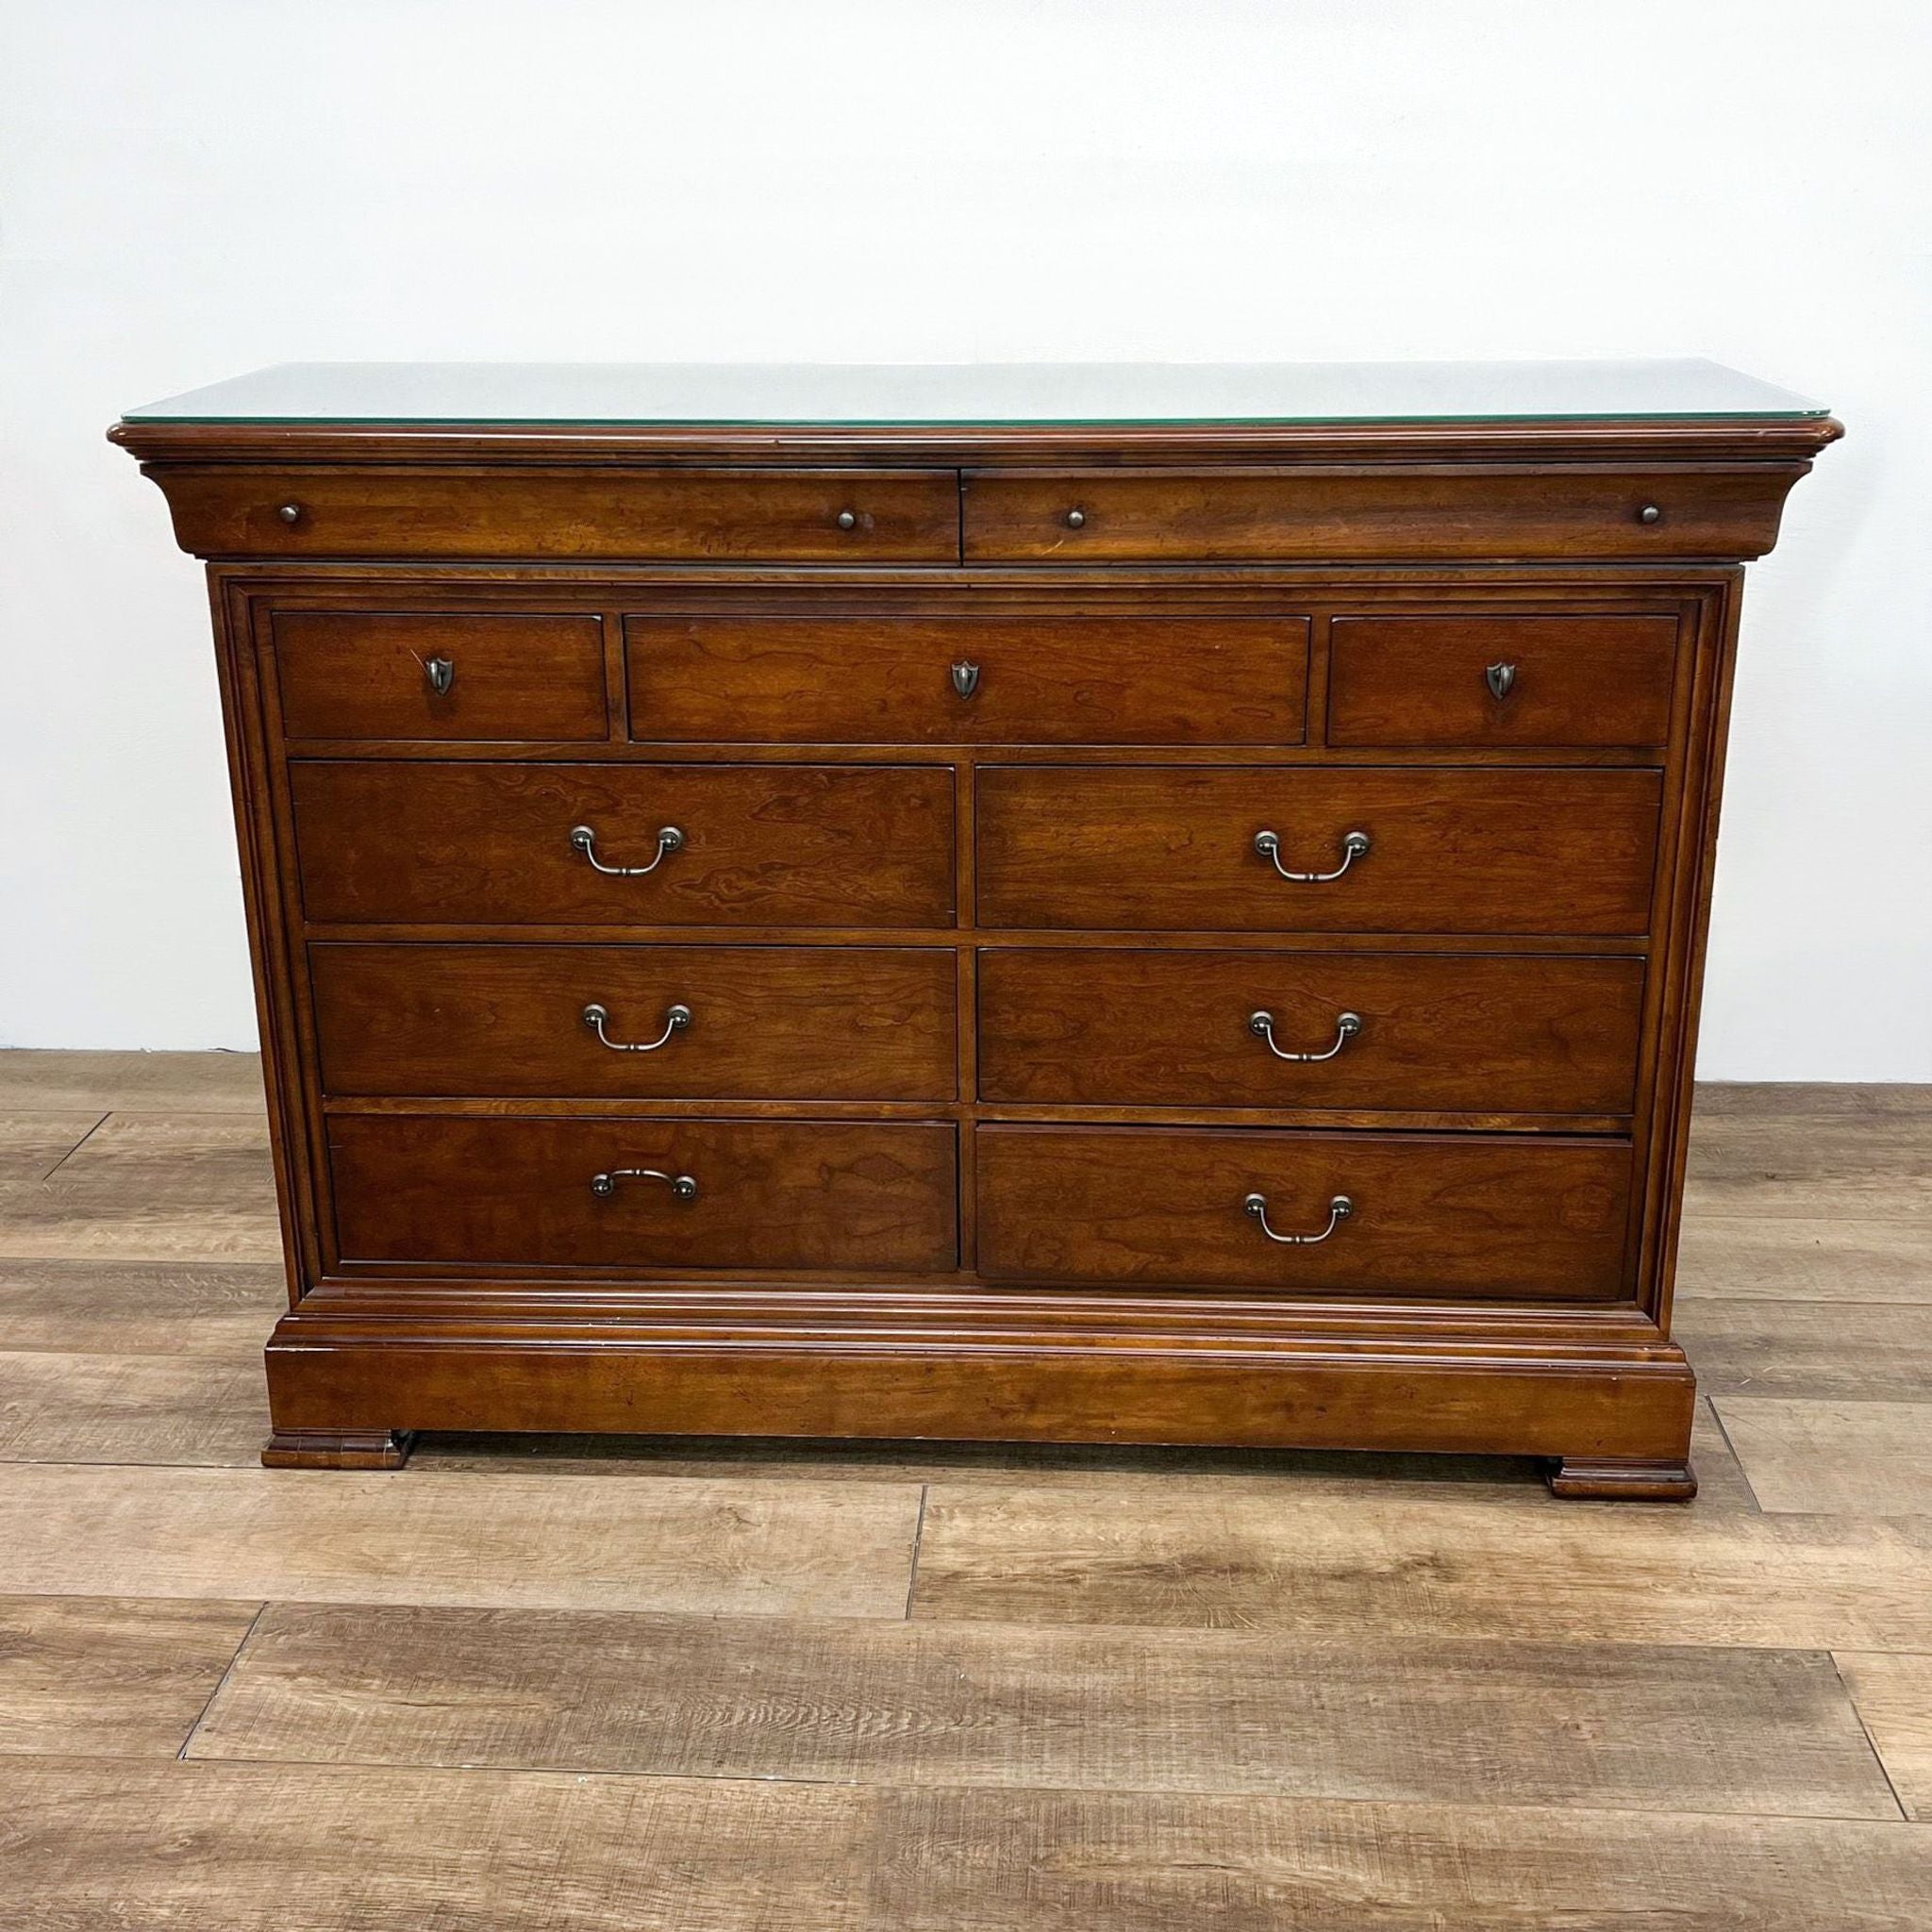 Elegant Thomasville wooden dresser with a glass top, 11 drawers, and polished brass handles.